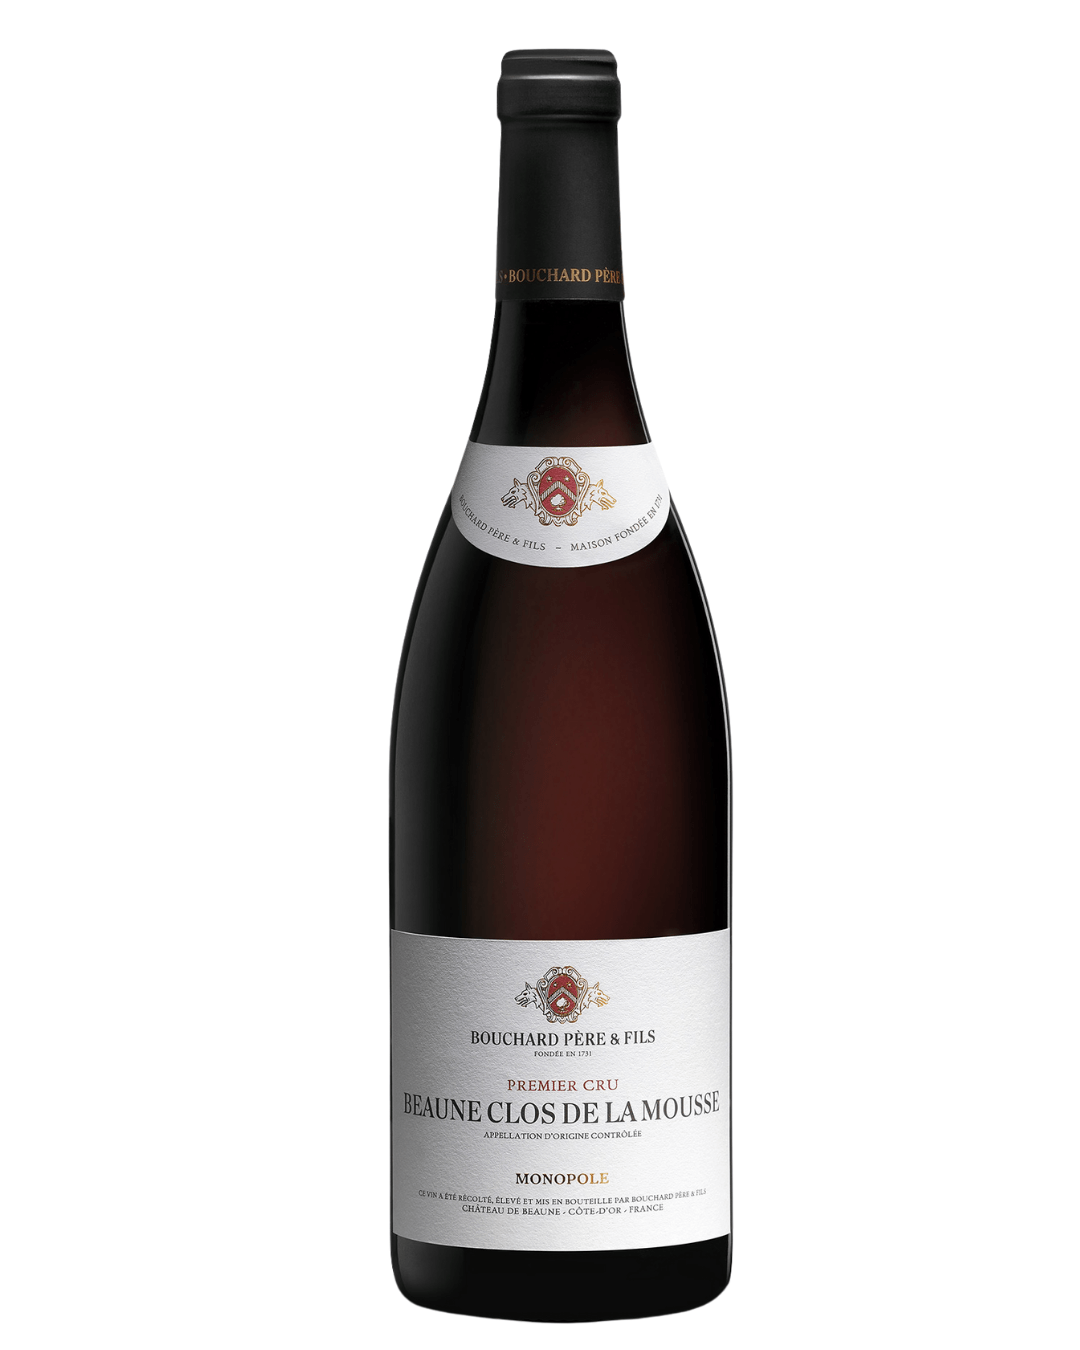 Shop Domaine Bouchard Pere & Fils Domaine Bouchard Pere & Fils Monopole Case 2017 online at PENTICTON artisanal French wine store in Hong Kong. Discover other French wines, promotions, workshops and featured offers at pentictonpacific.com 